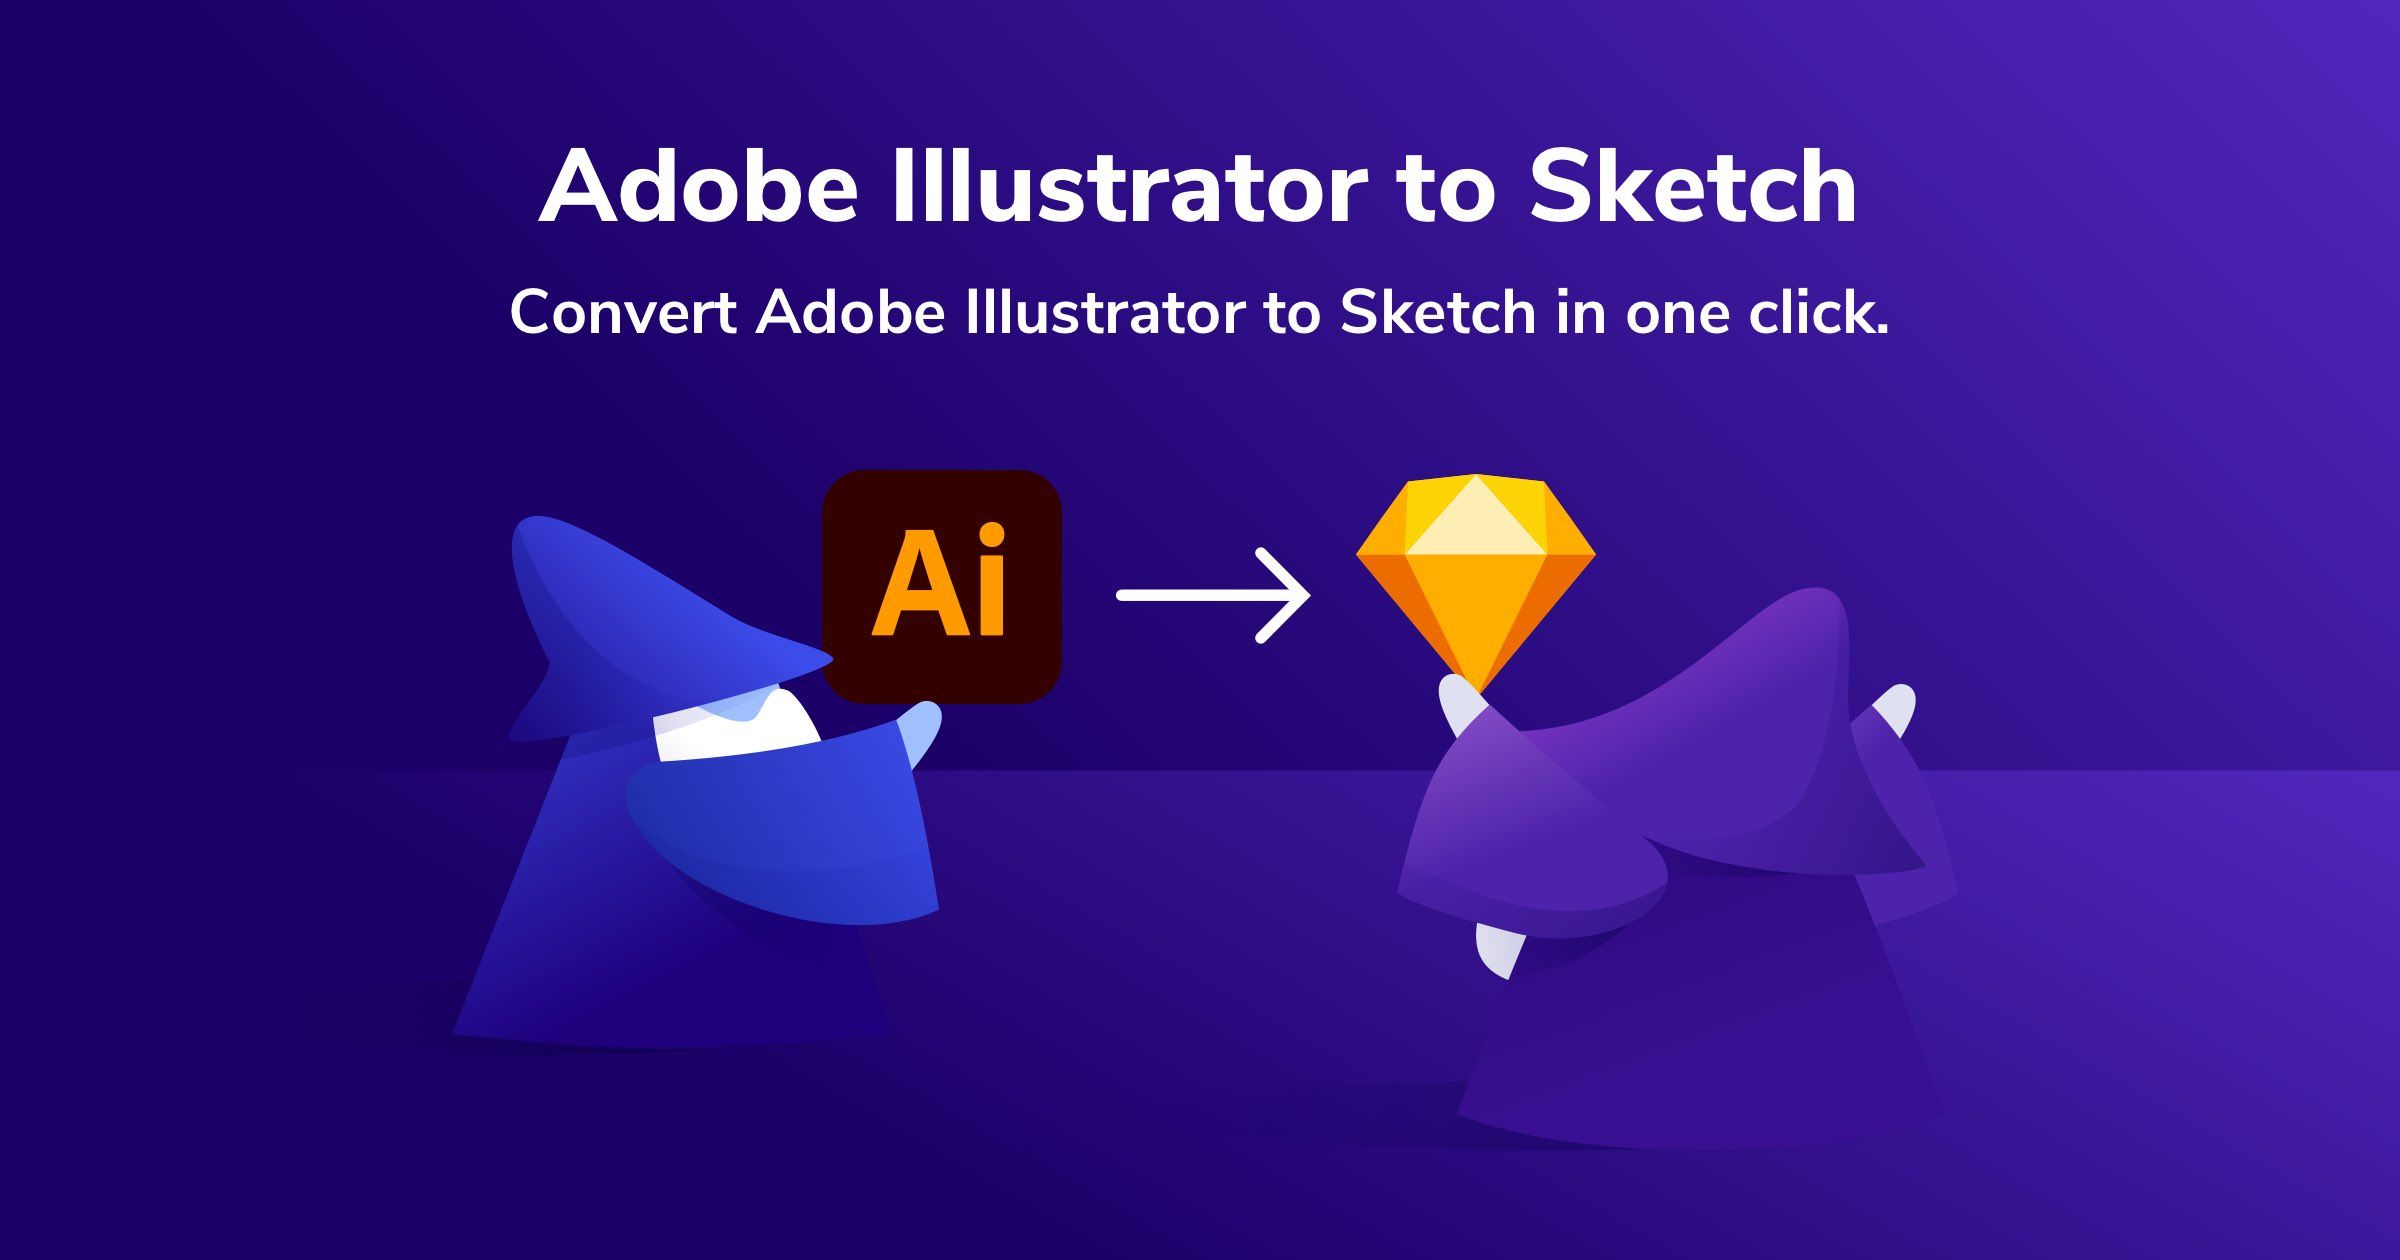 Adobe Illustrator Converting Hand Drawn Images Into Vector Images